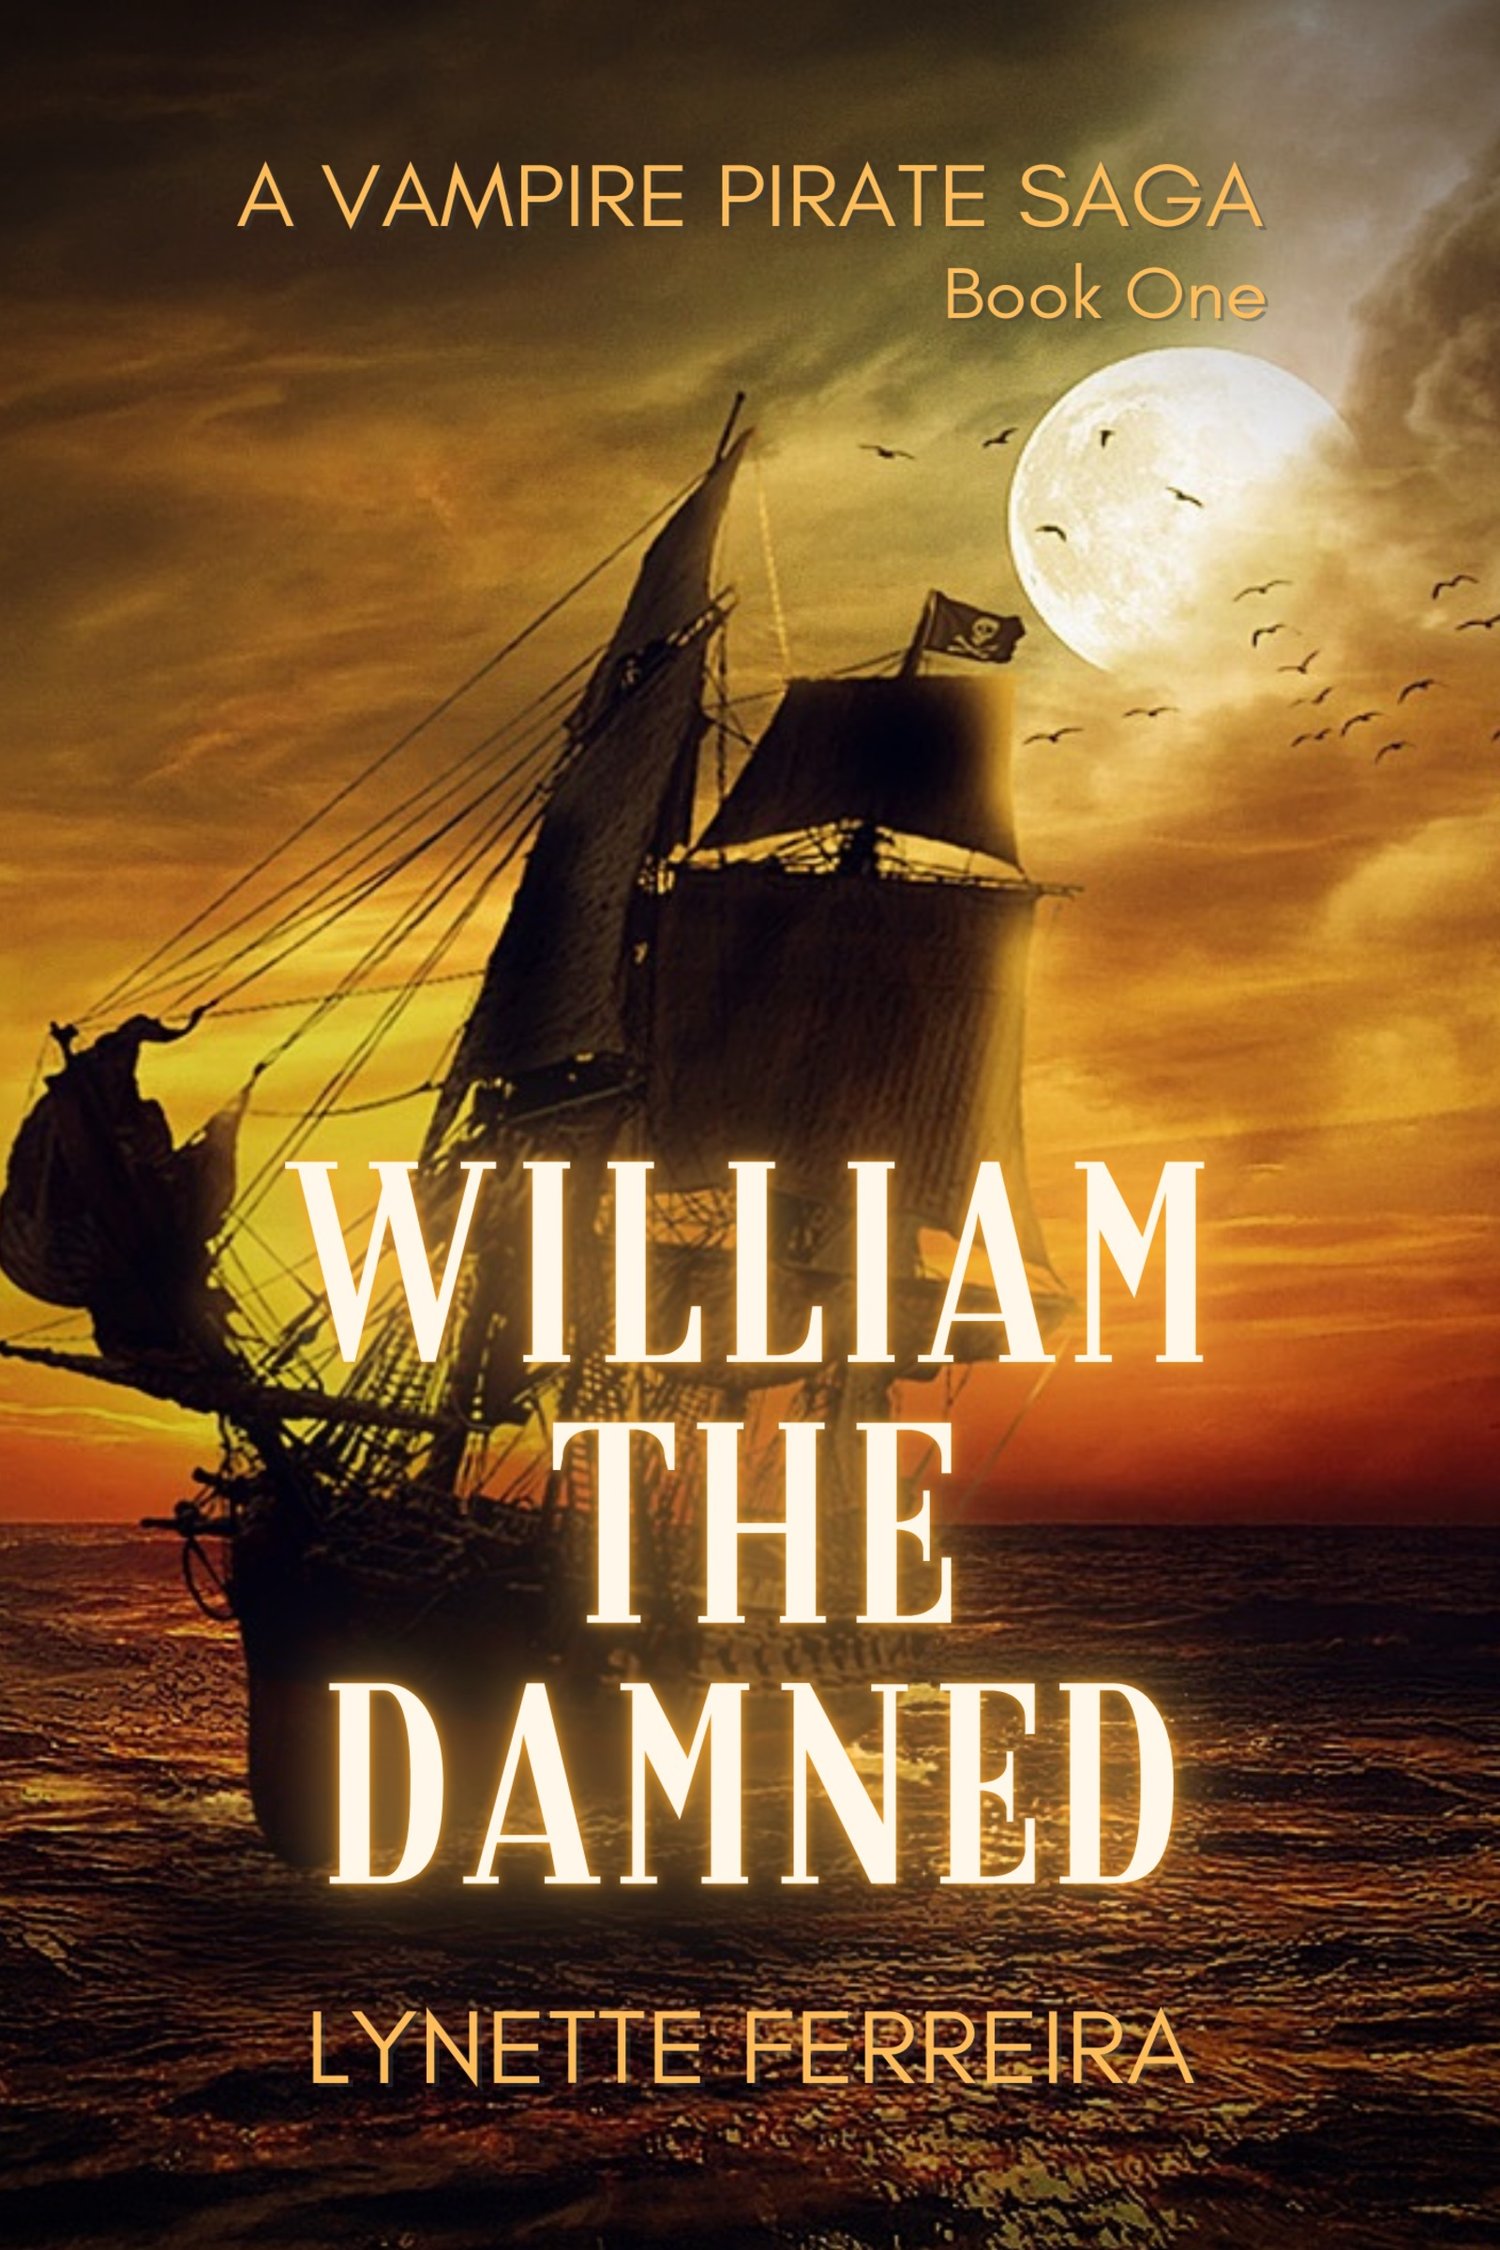 William the Damned by Lynette Ferreira